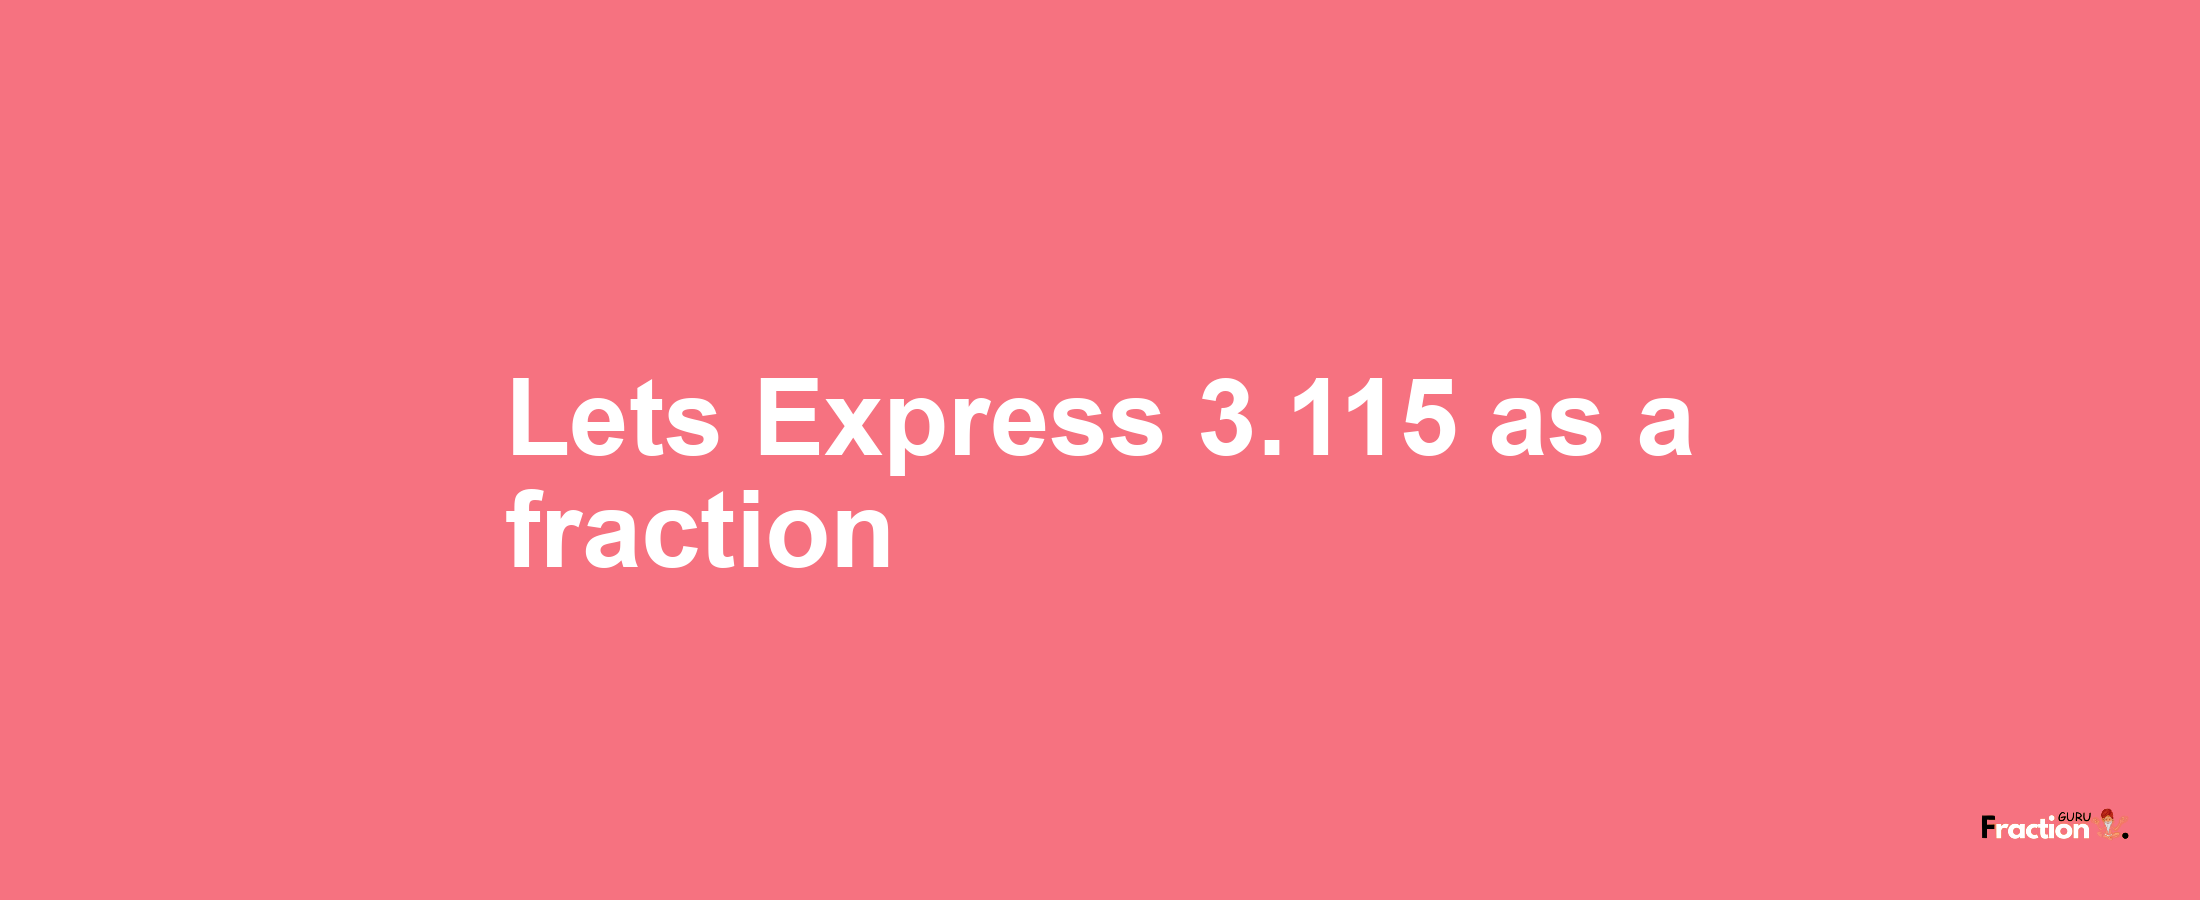 Lets Express 3.115 as afraction